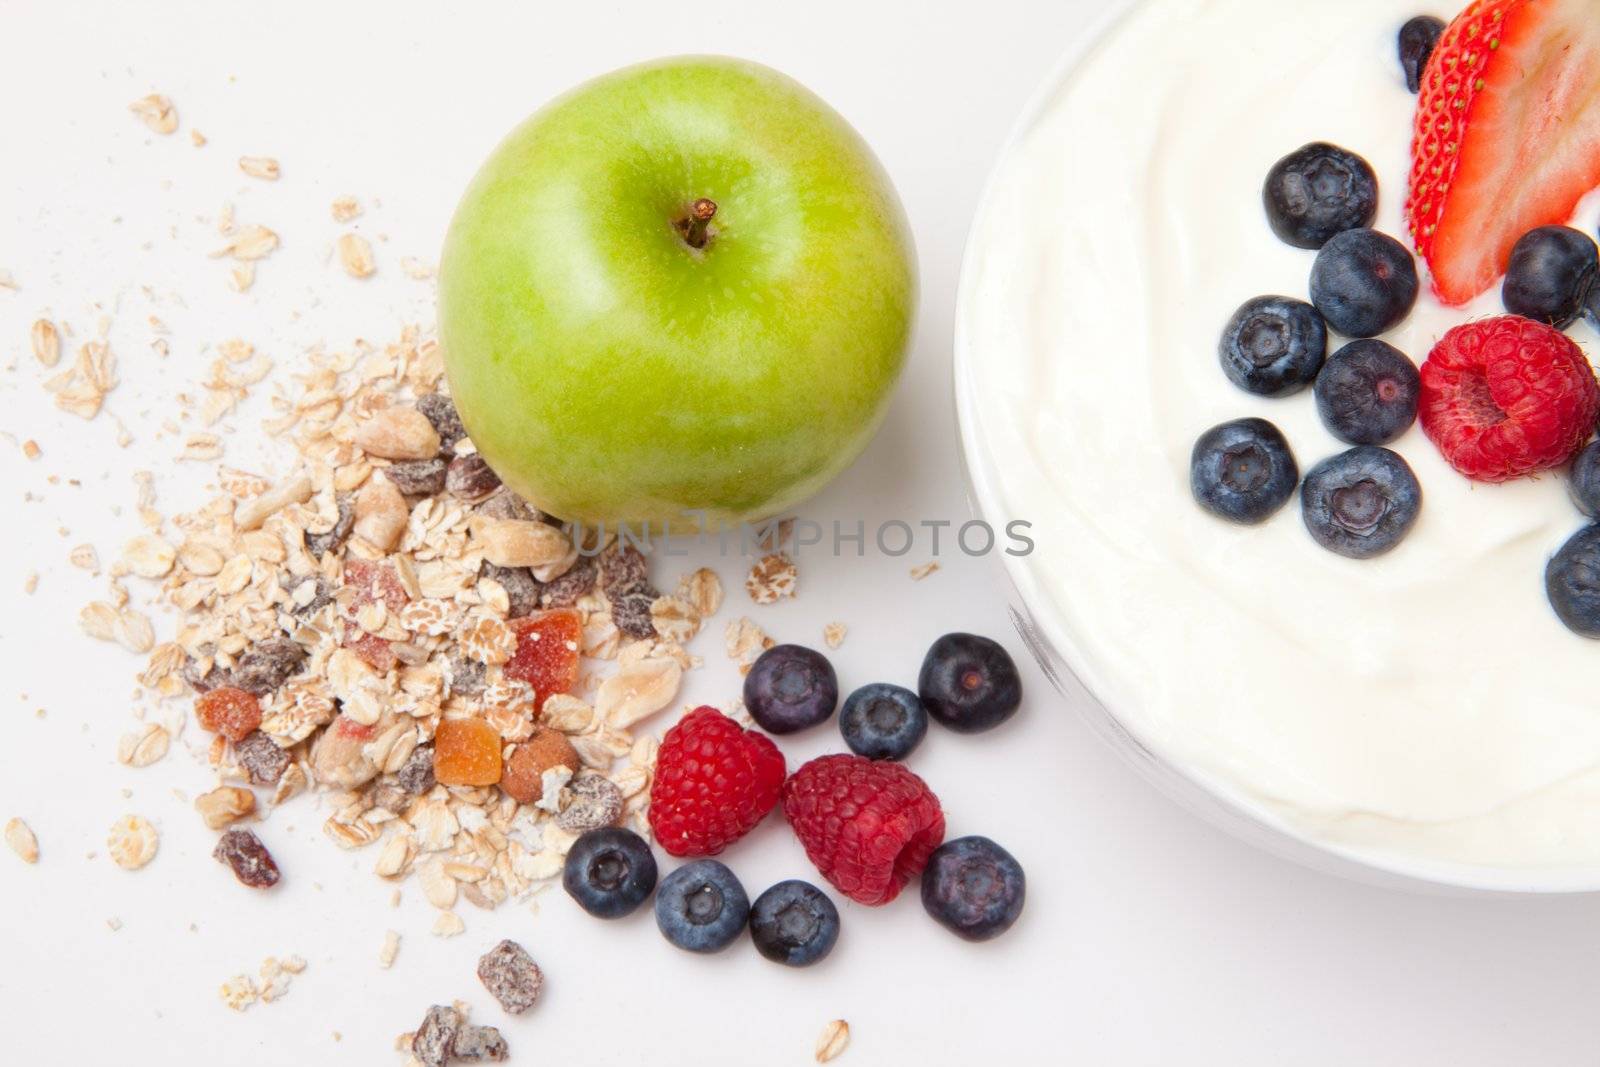 Healthy eating with fruits by Wavebreakmedia